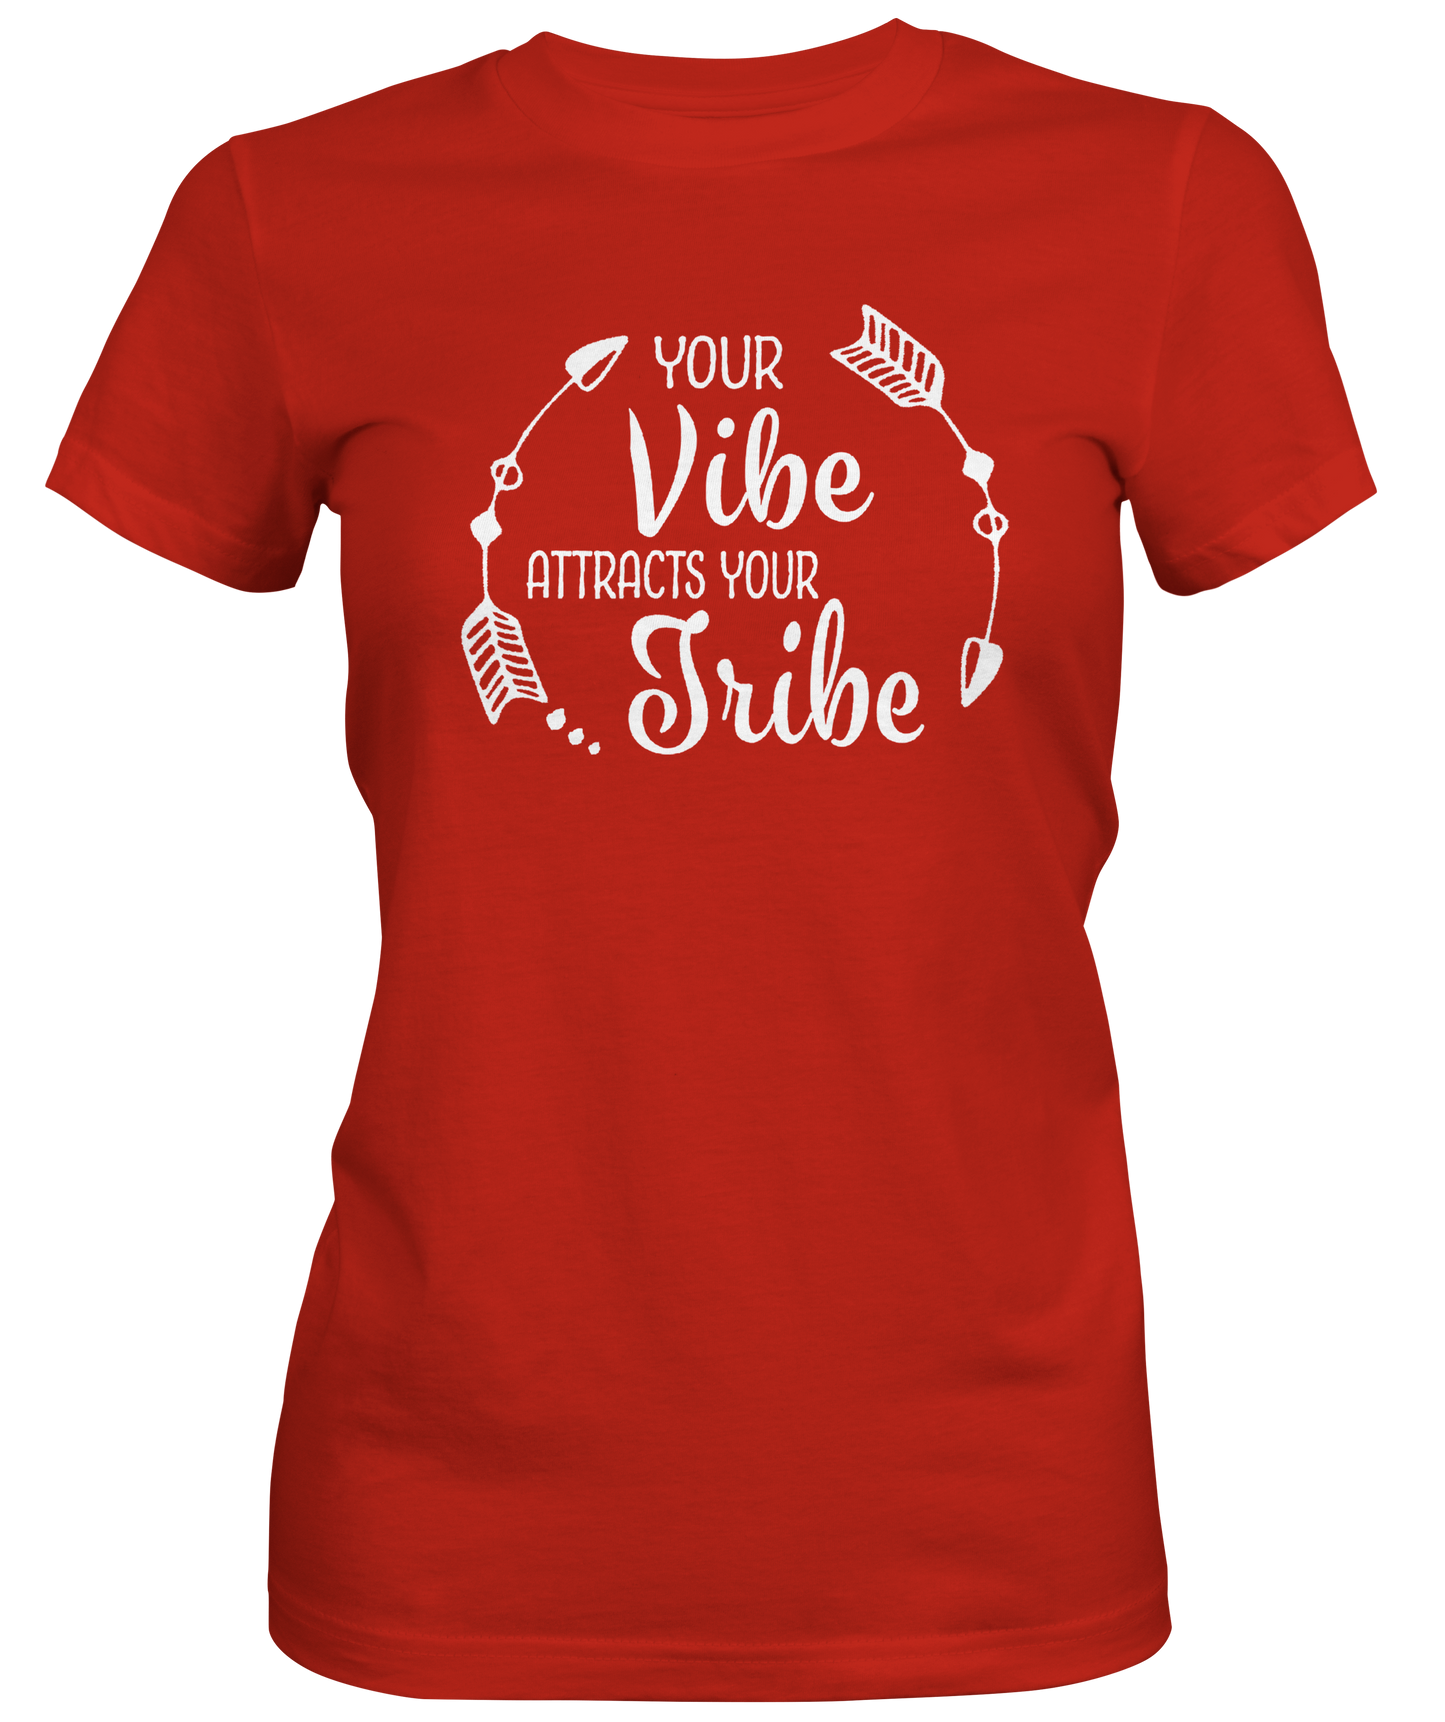 Your Vibe Attracts Your Tribe T-shirt